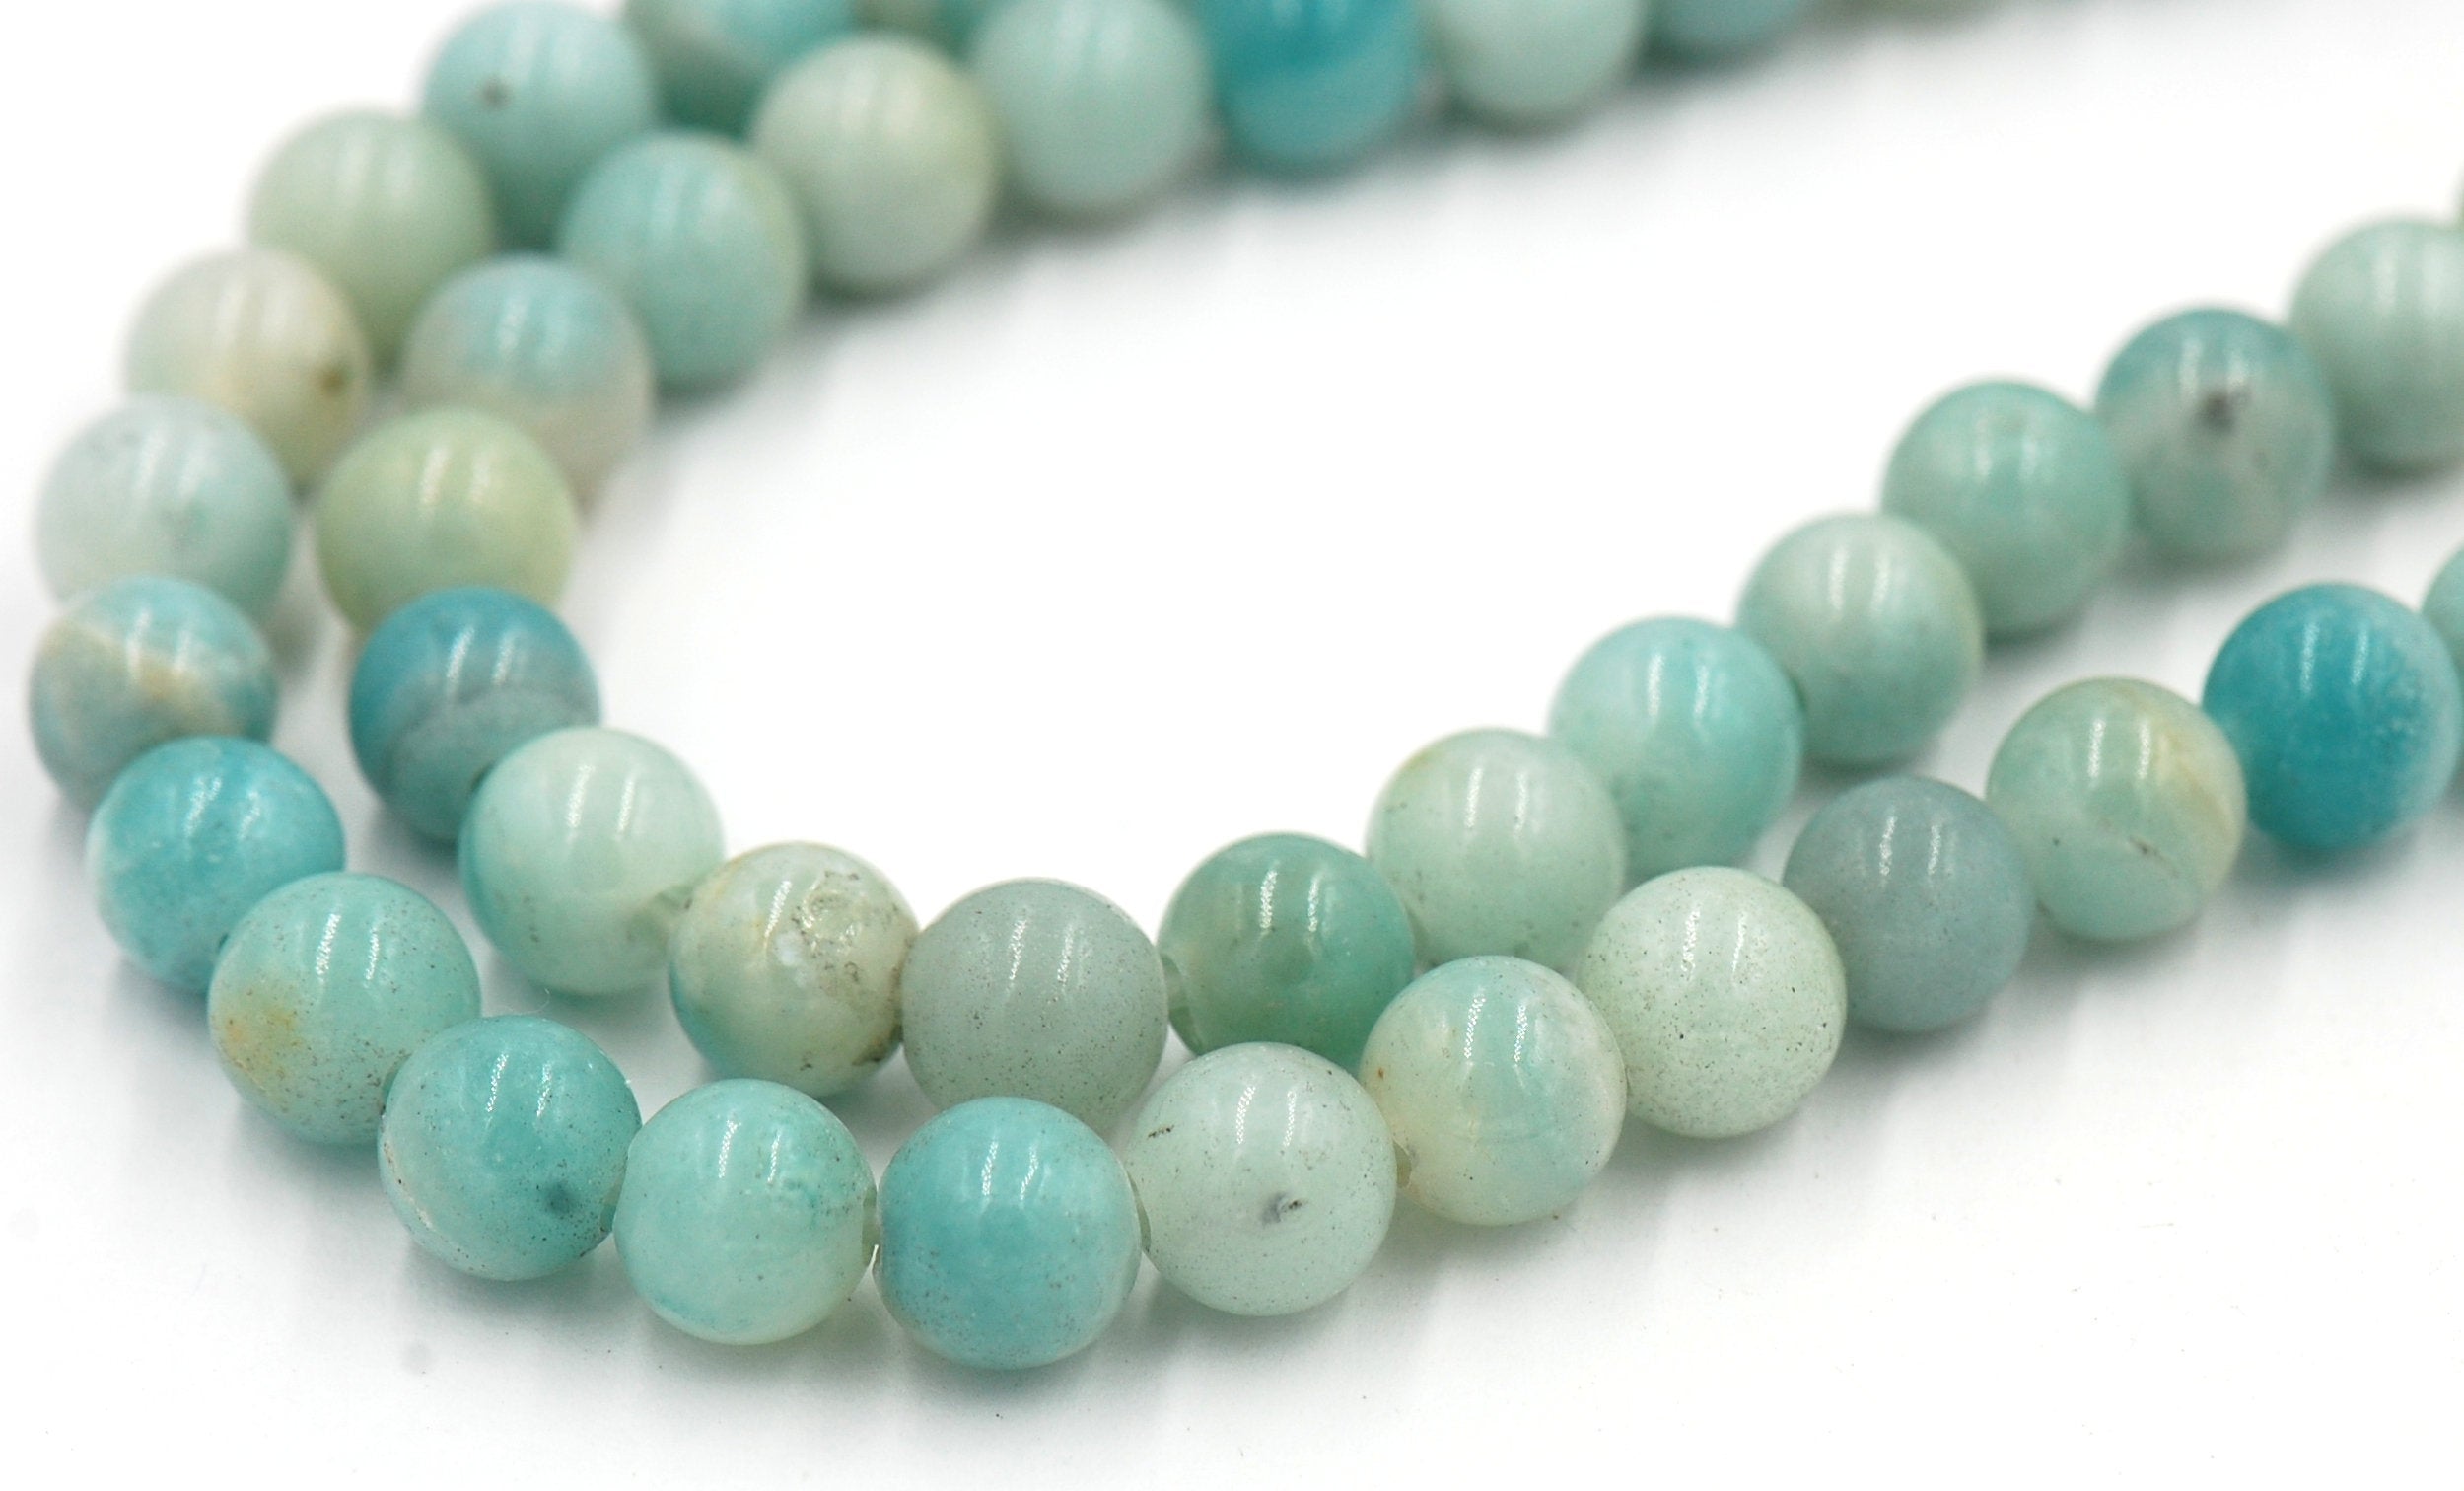 Large Hole Amazonite Blue Green 6mm, 8mm, 10mm, 12mm Round Beads -14.75 inch strand